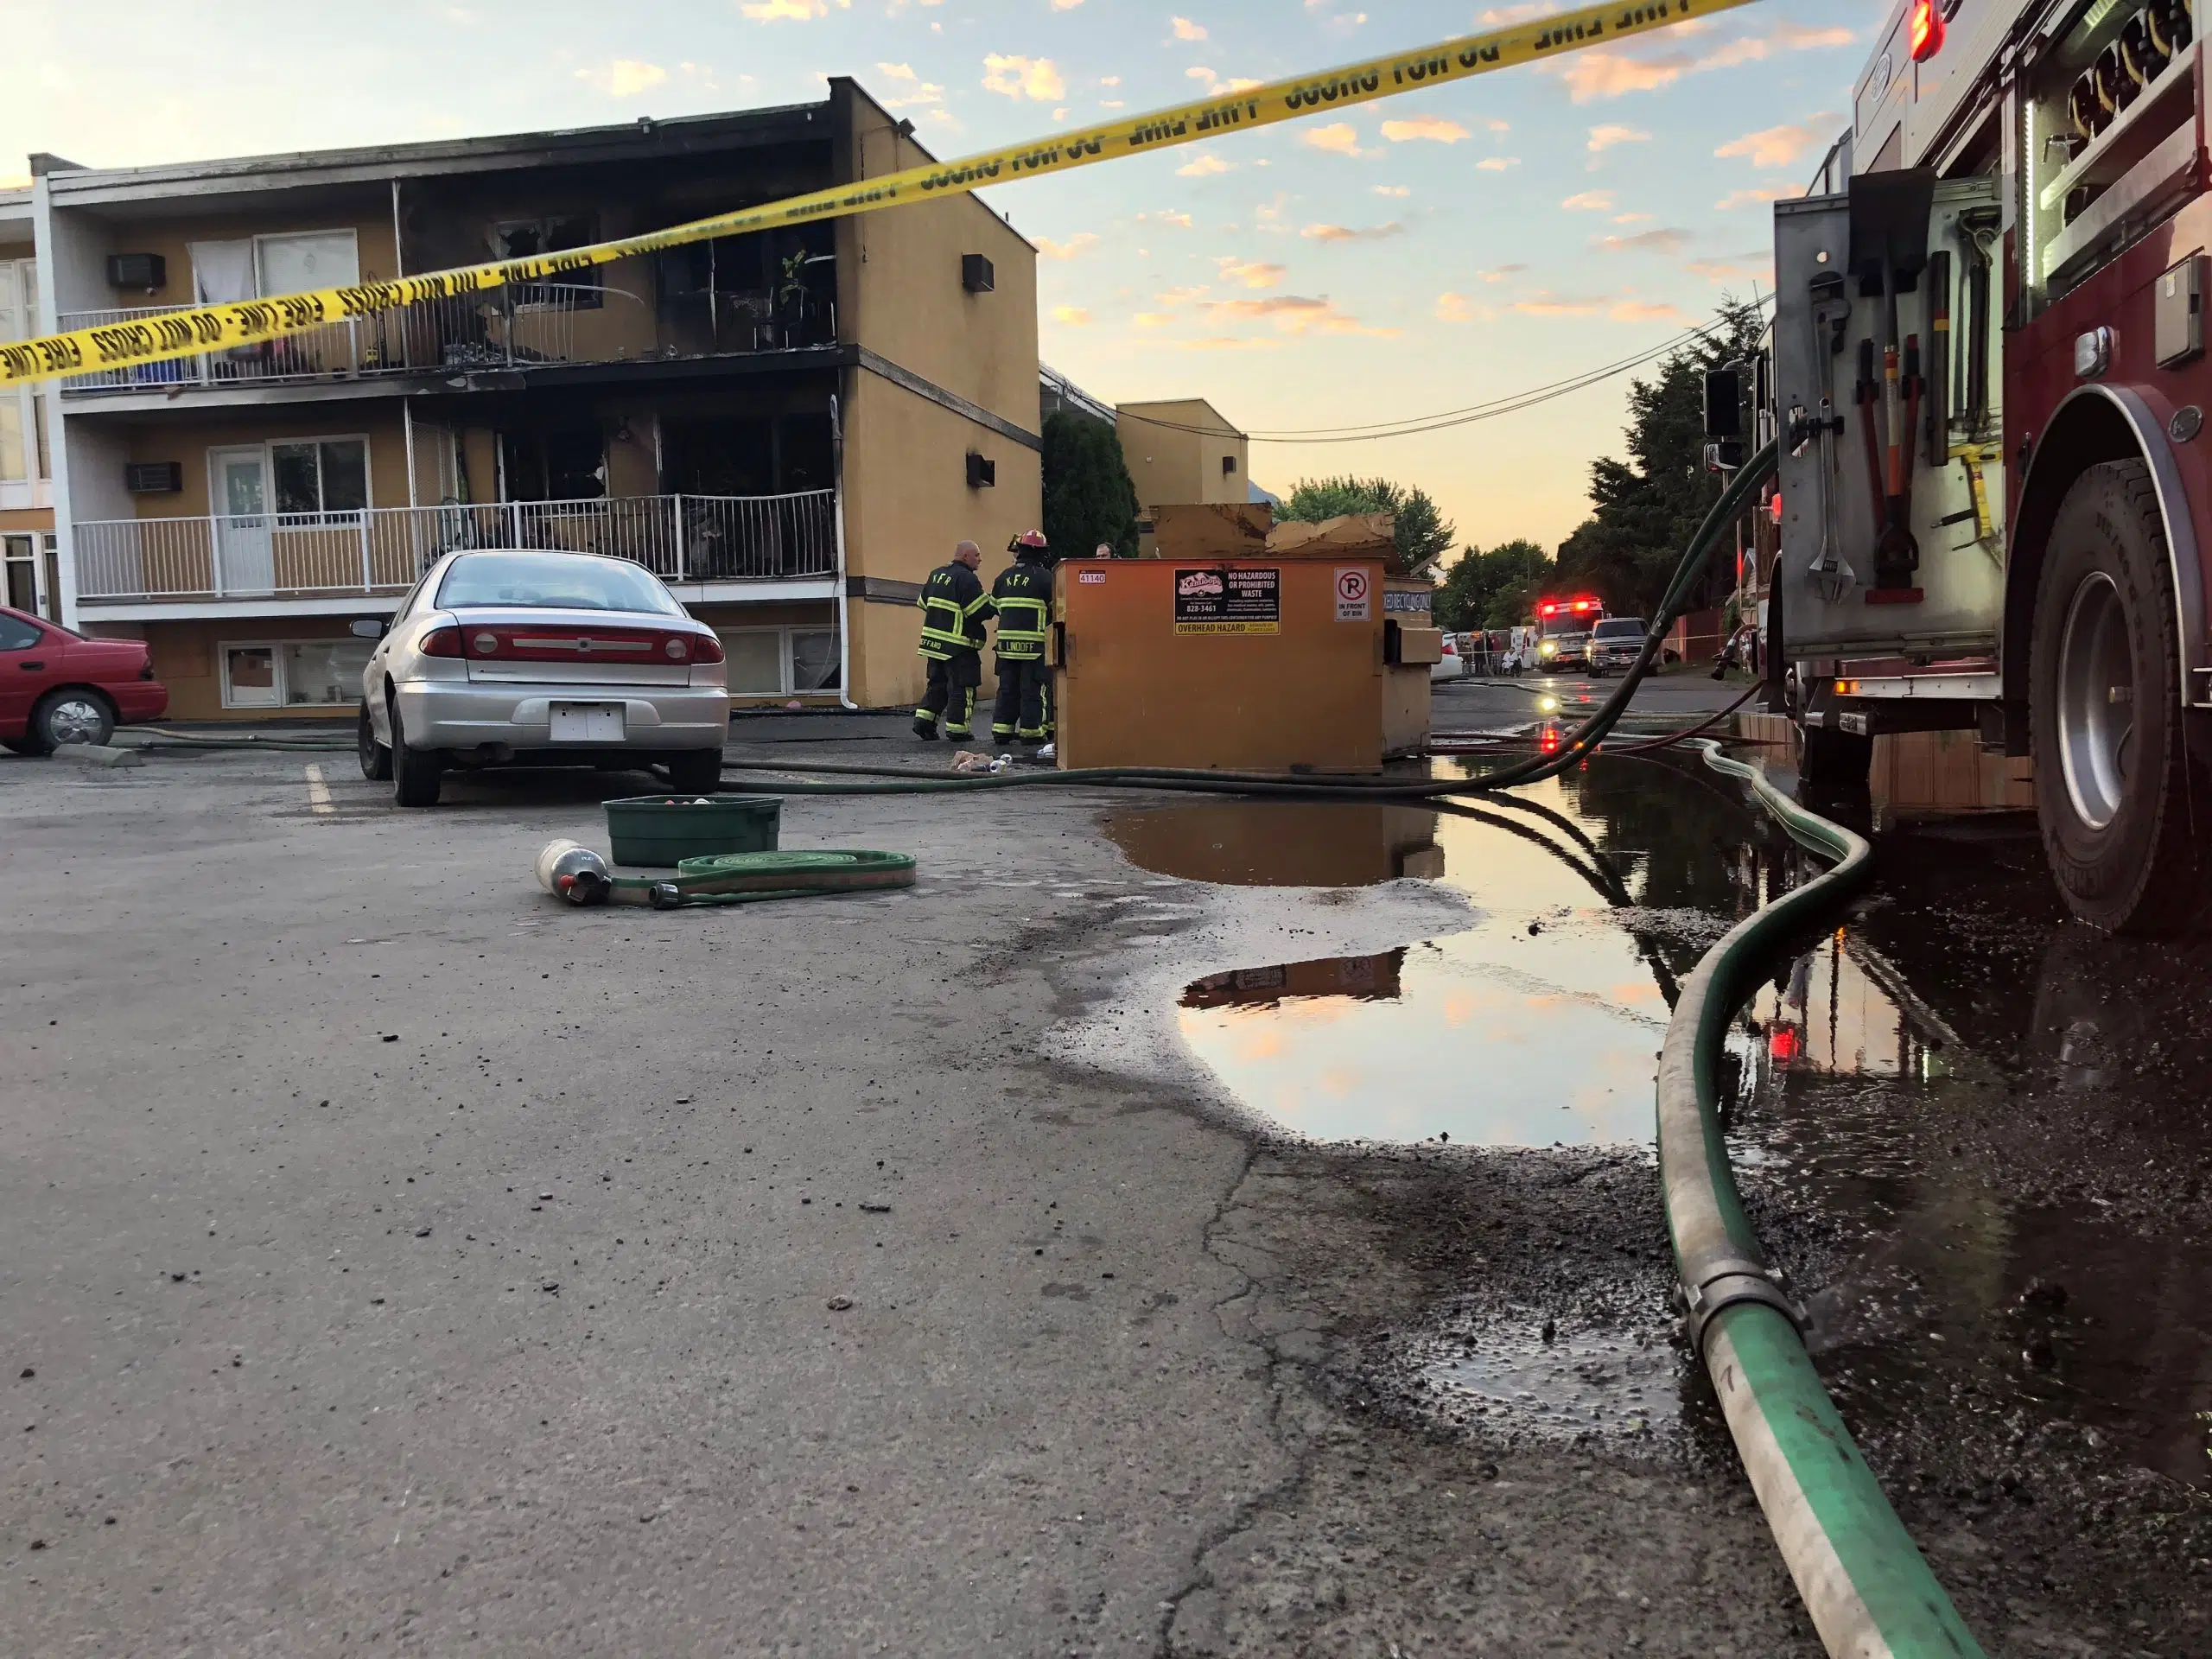 Early morning fire destroys at least two apartments, damages others